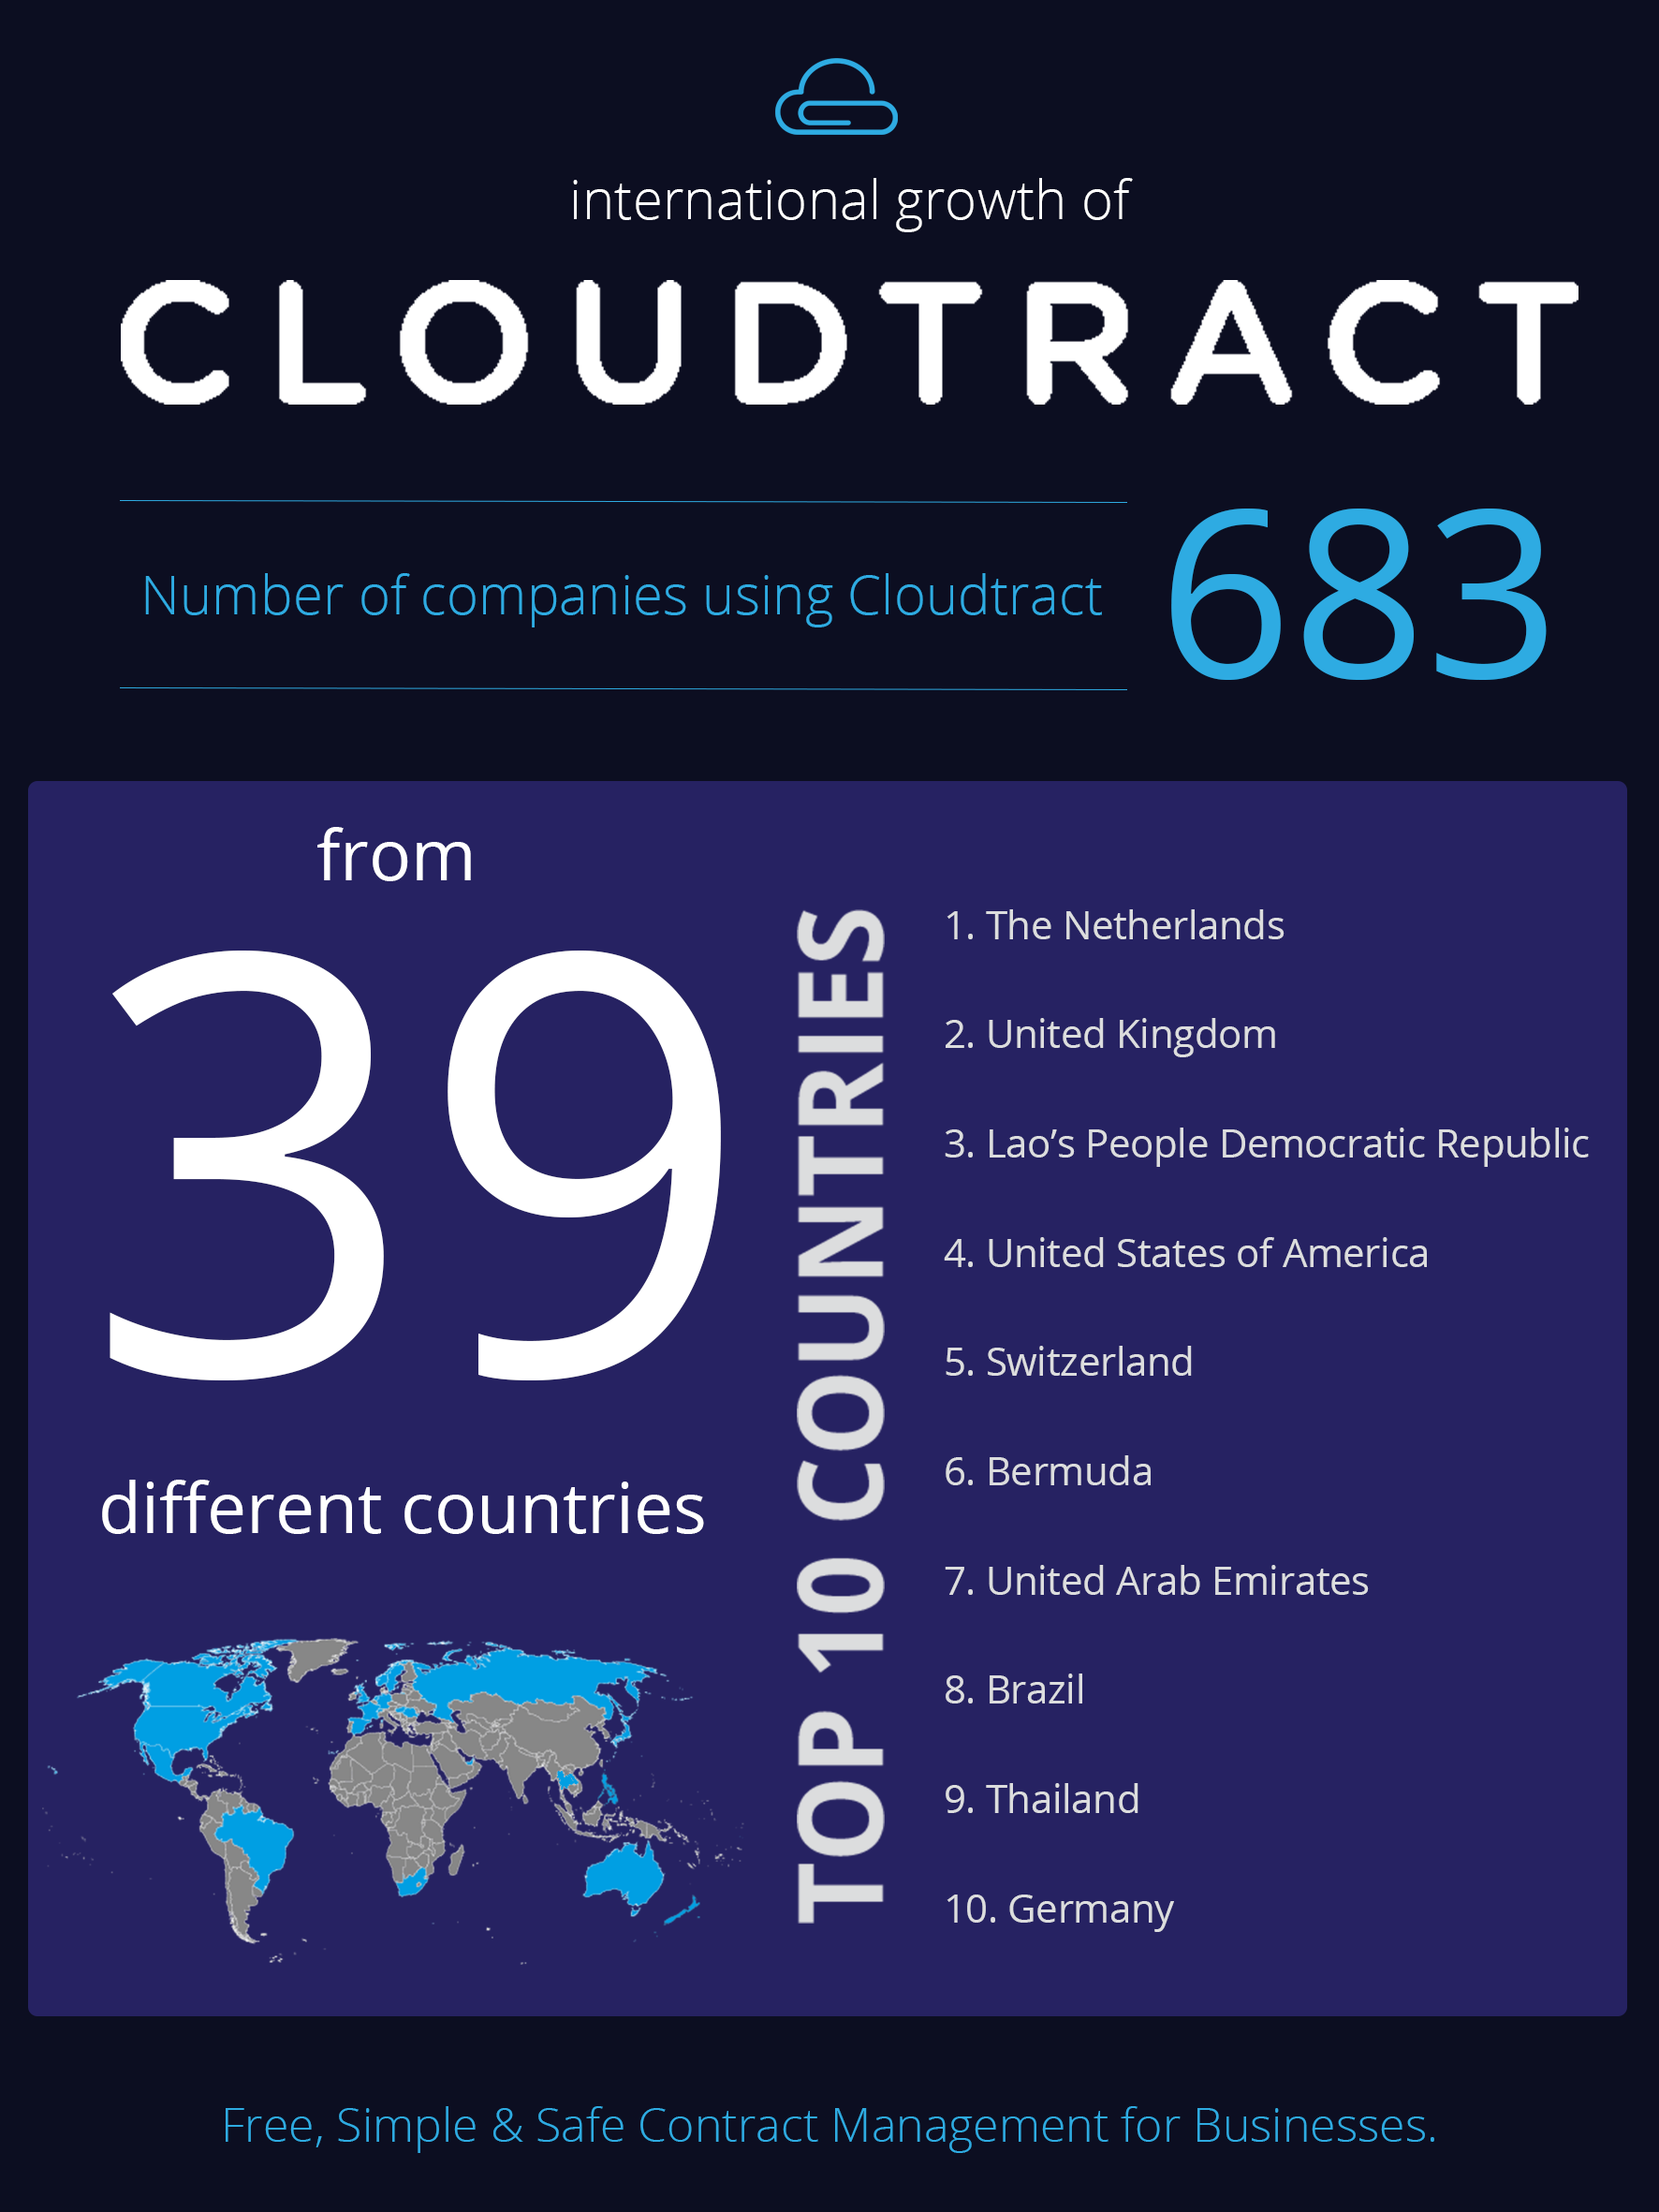 Cloudtract’s global growth indicates a universal need of SMEs for a contract management solution